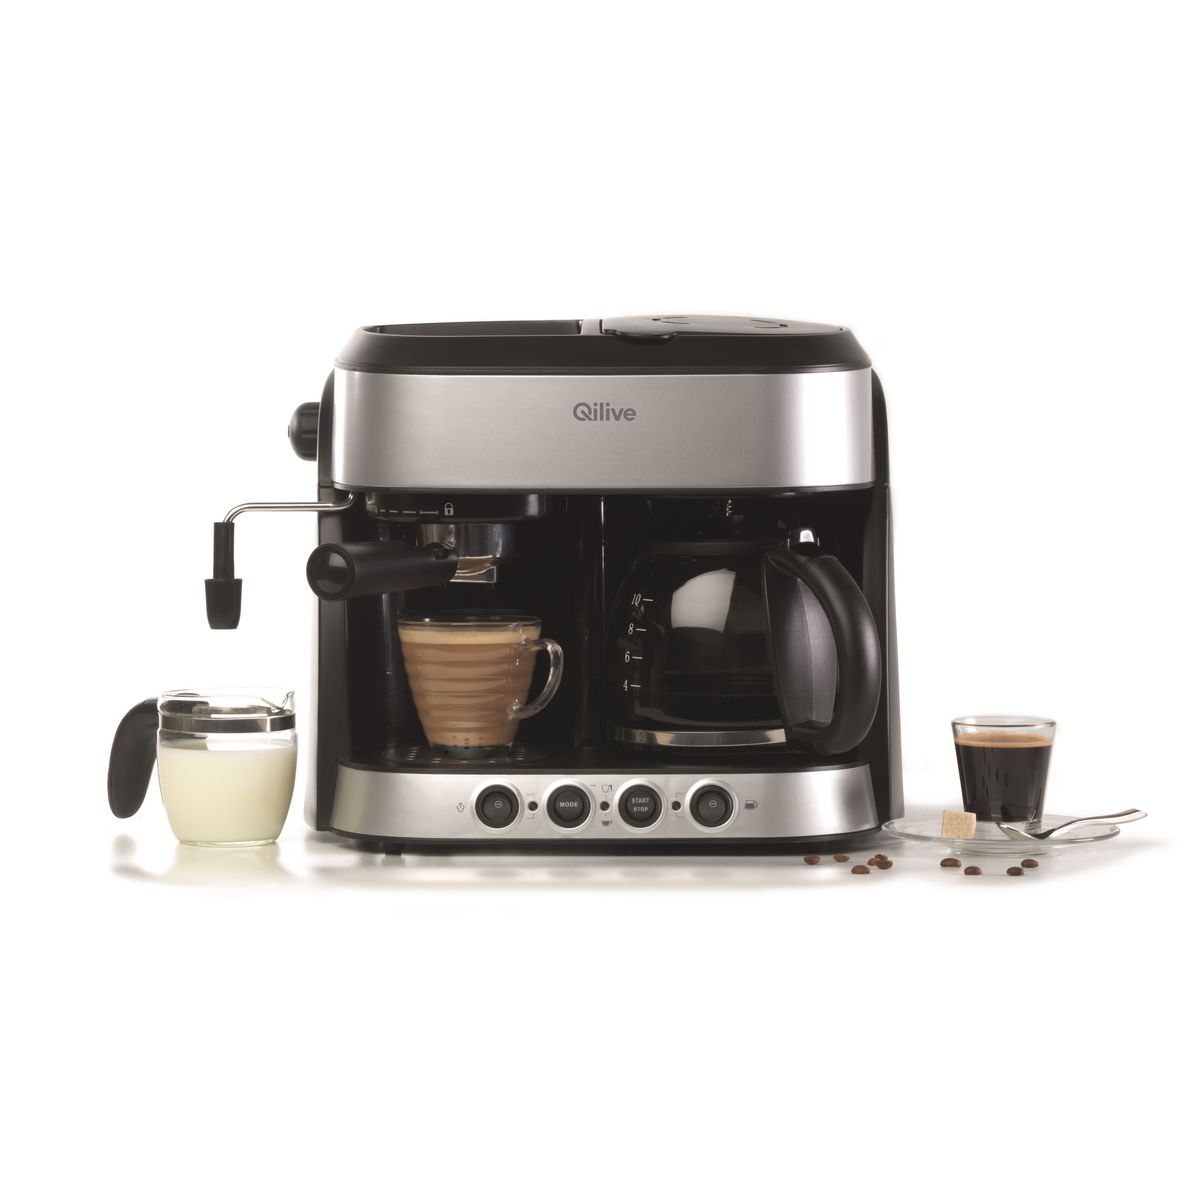 all the best Read Outflow QILIVE Expresso combiné 859403 pas cher - Auchan.fr